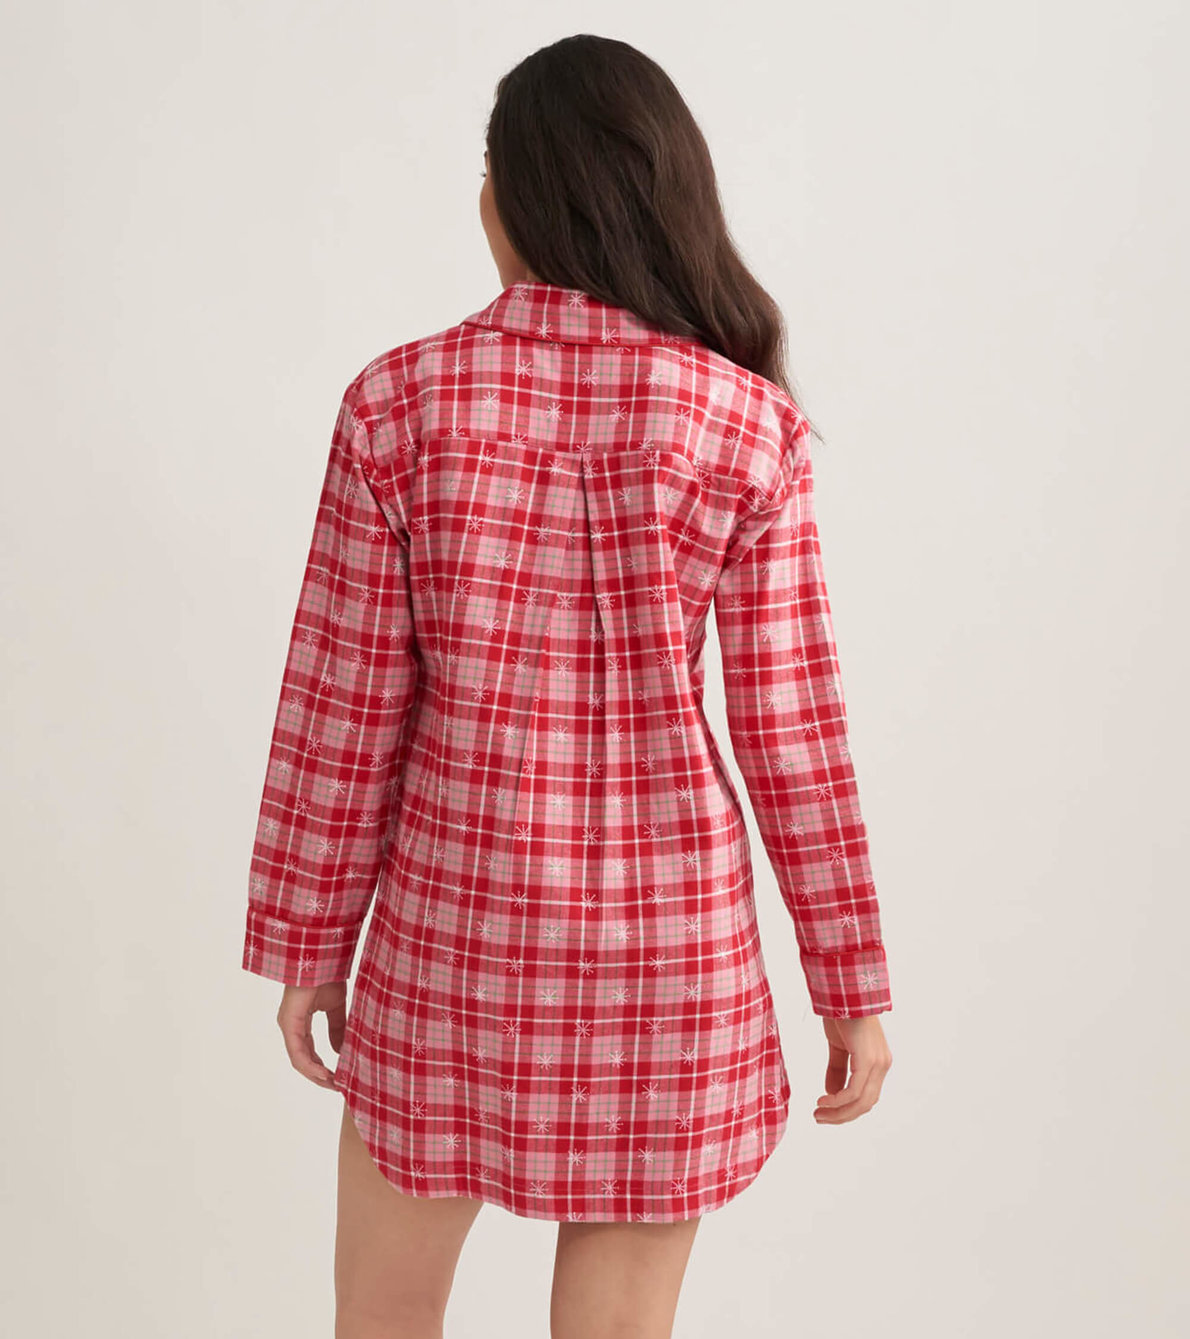 View larger image of Retro Christmas Plaid Women's Flannel Nightdress